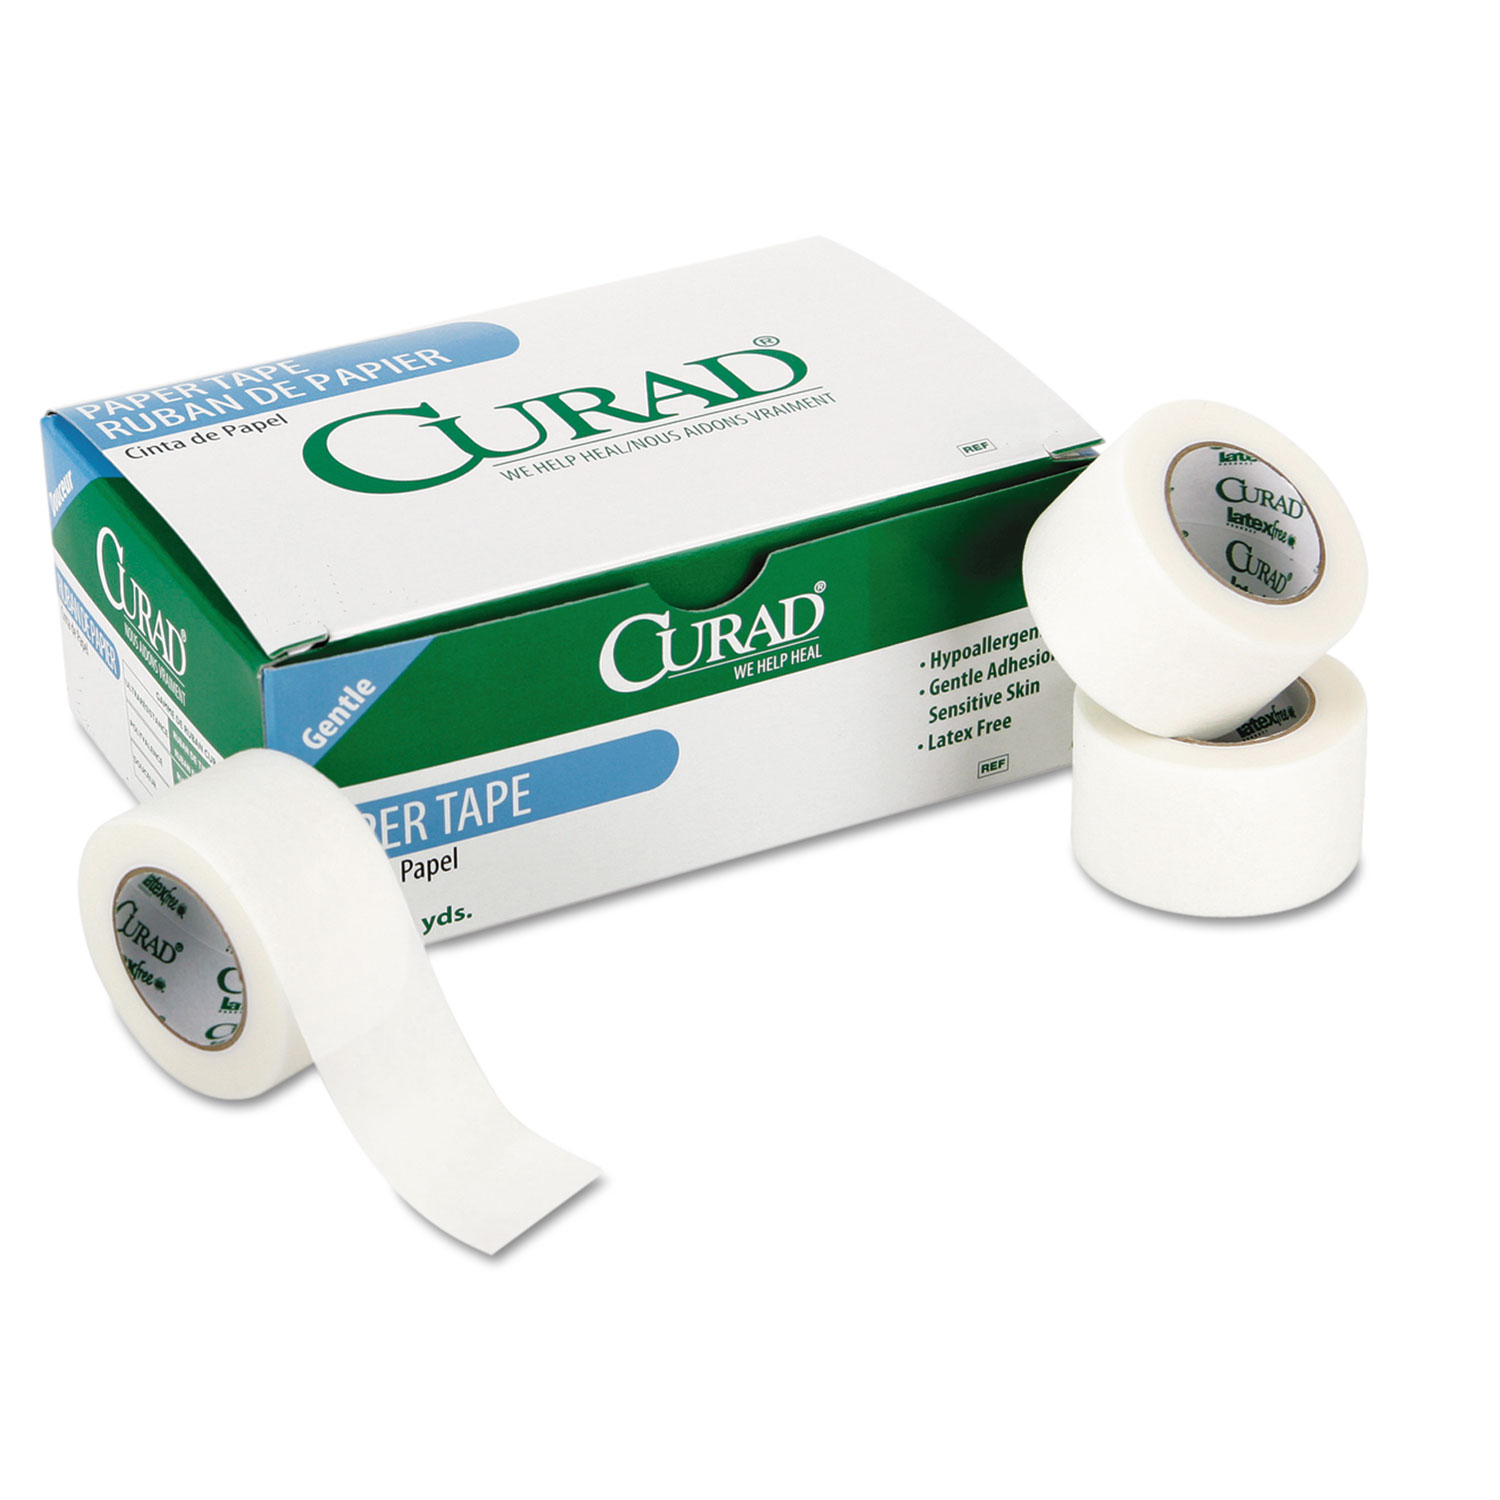  Curad NON270002 Paper Adhesive Tape, 1 Core, 2 x 10 yds, White, 6/Pack (MIINON270002) 